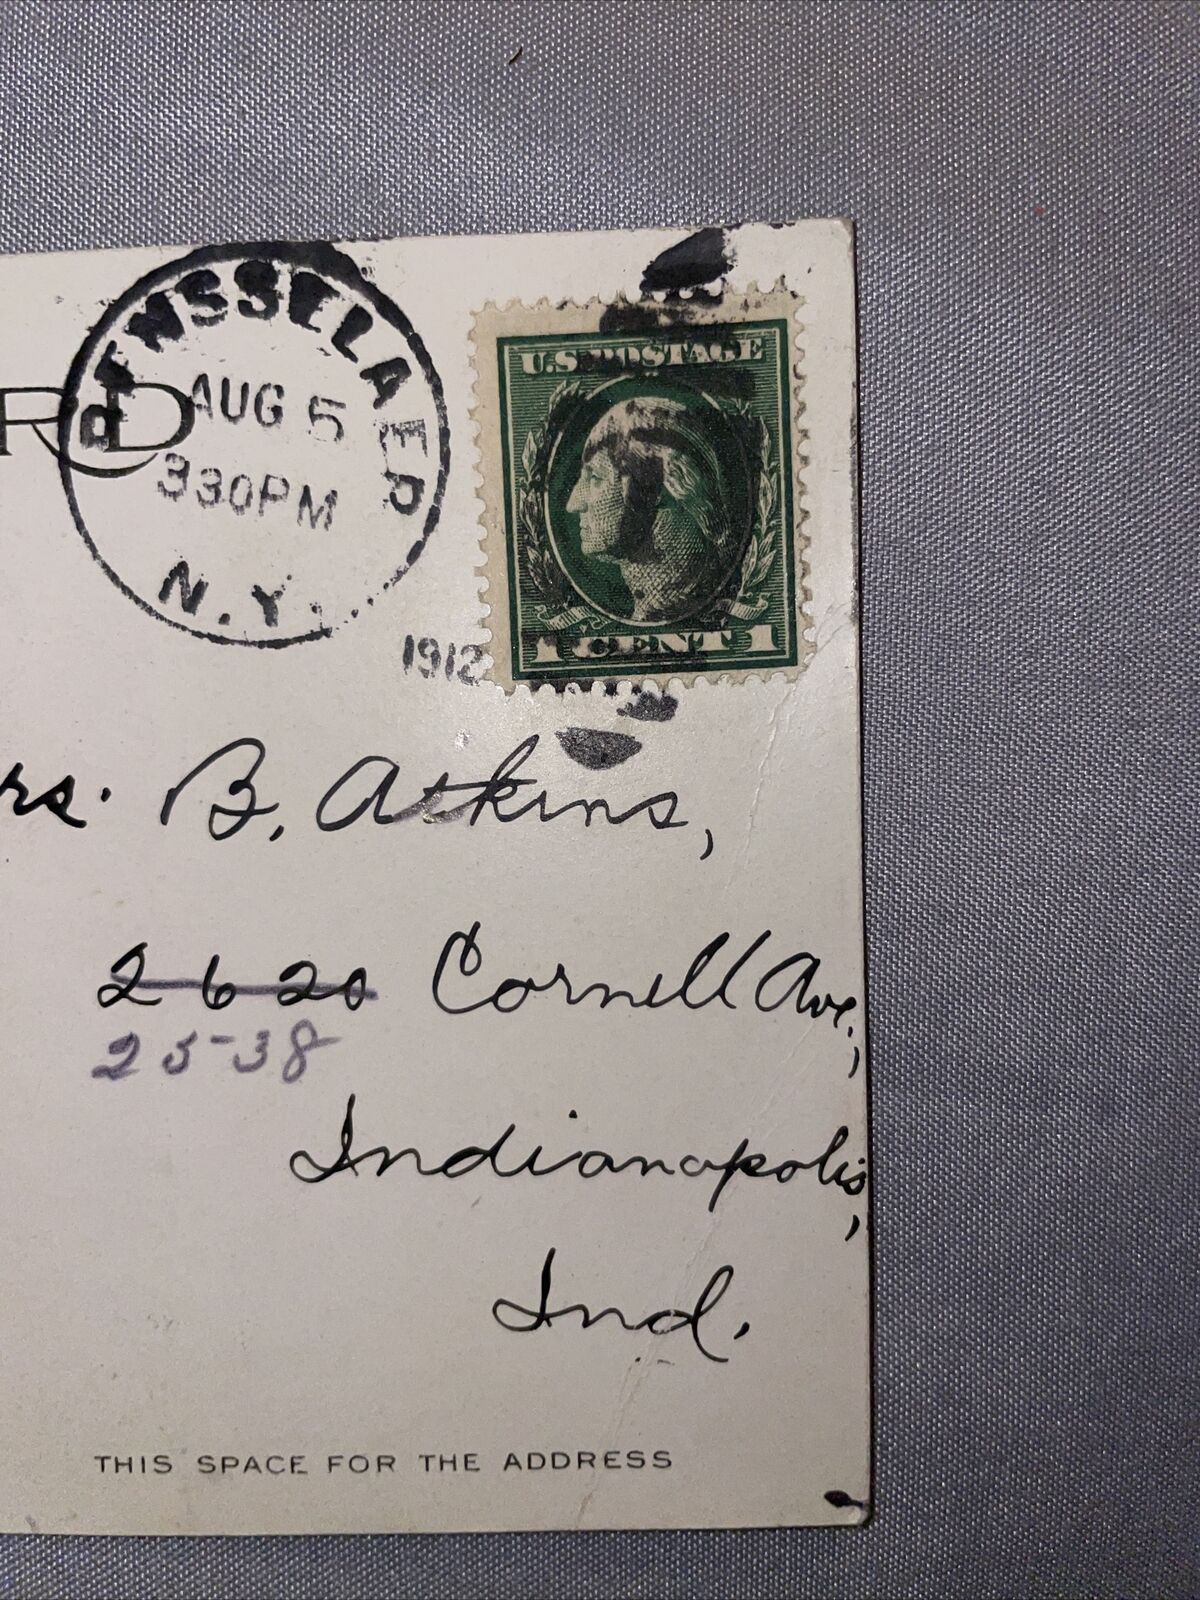 1912 Postmarked Postcard with Rare George Washington 1 Cent Green Stamp Vintage